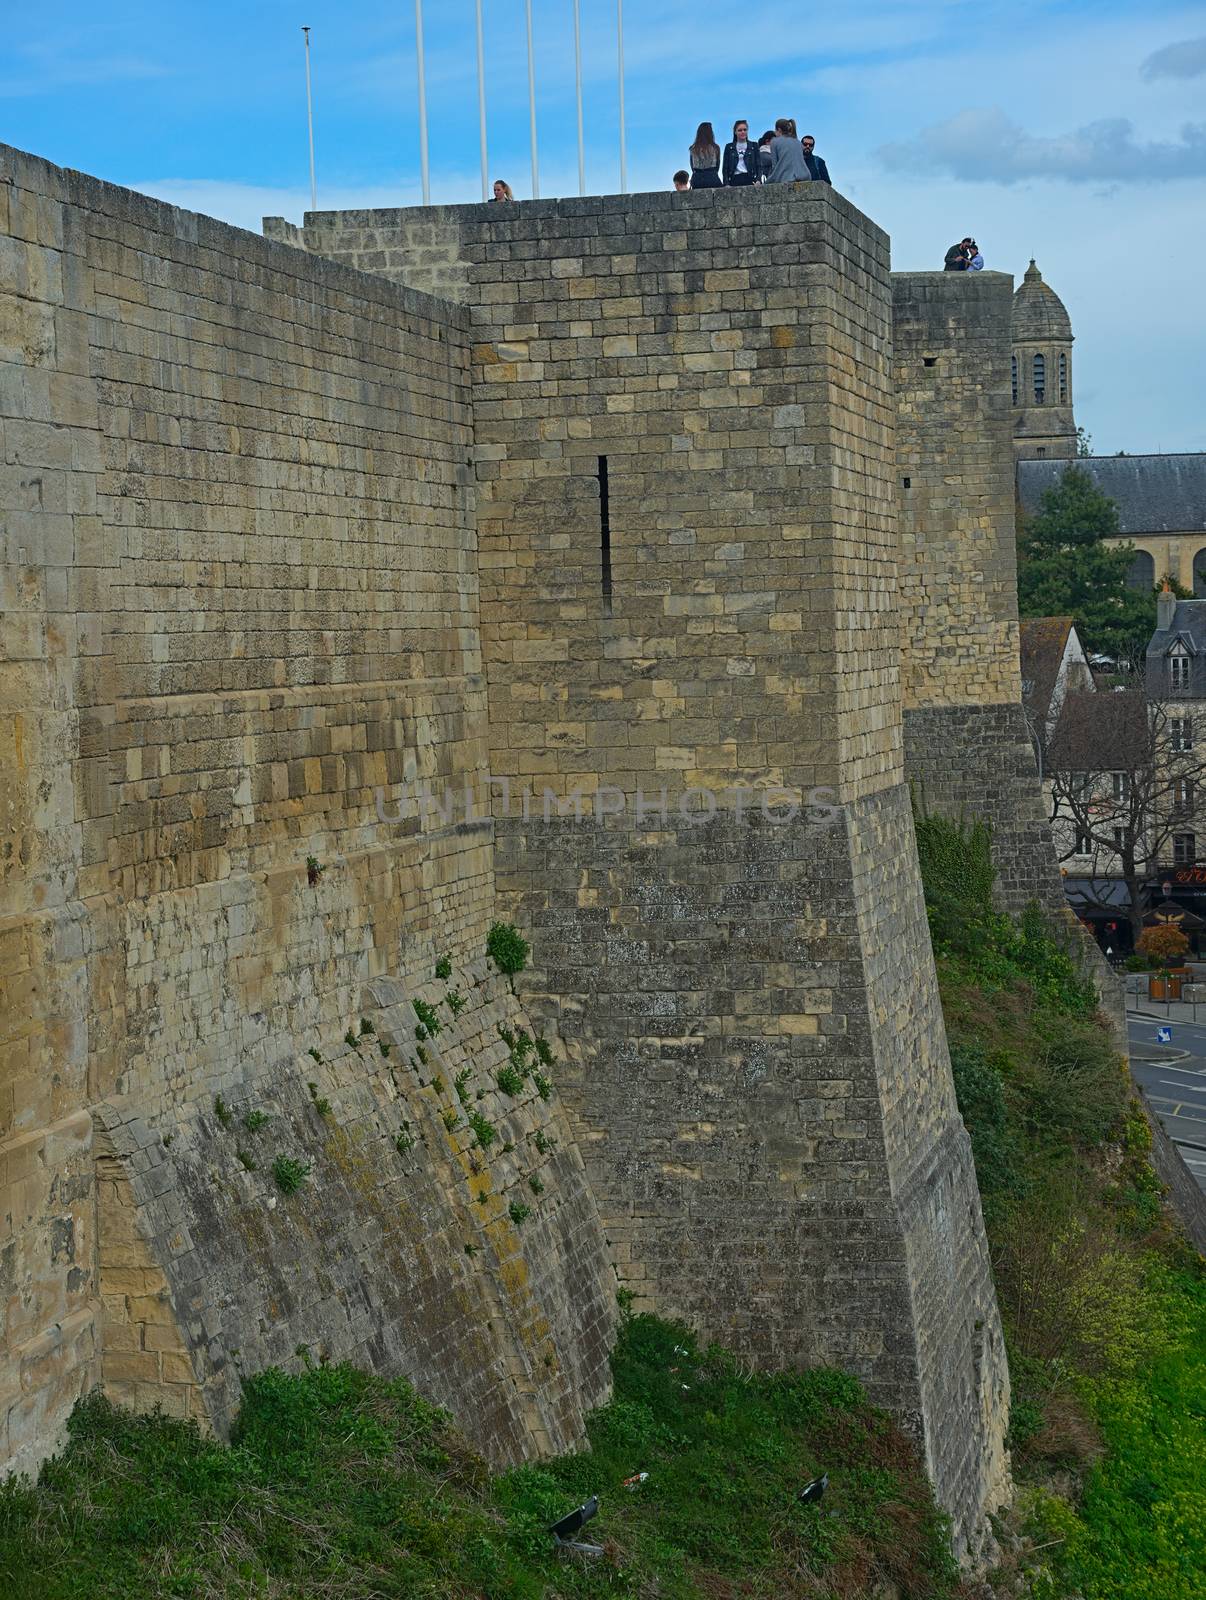 CAEN, FRANCE - April 7th 2019 - View on huge stone defensive wall and tower at fortress